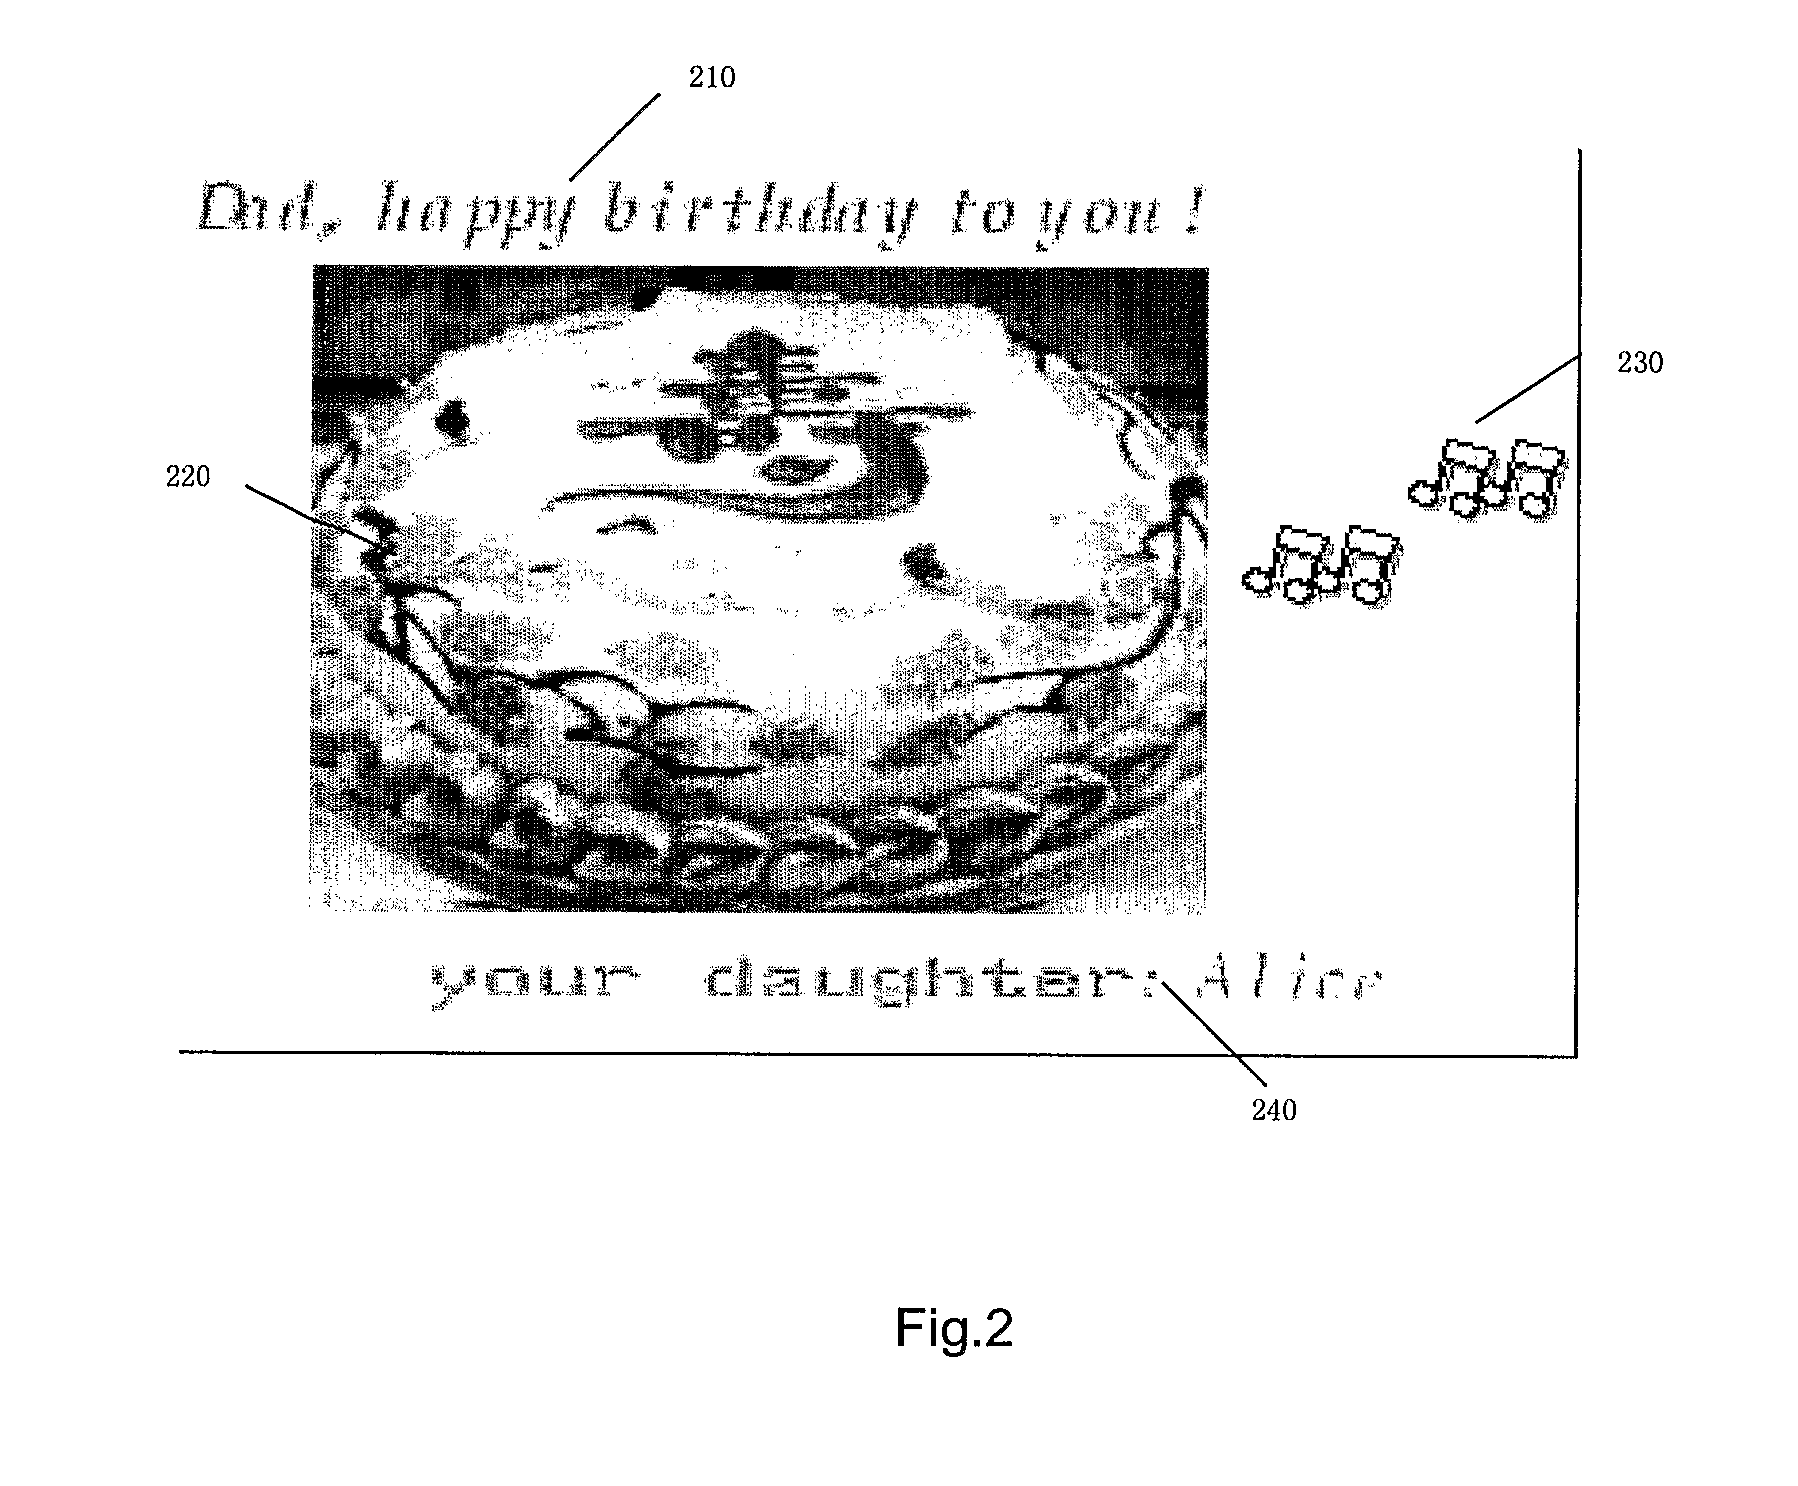 Method and system for editing a multimedia message